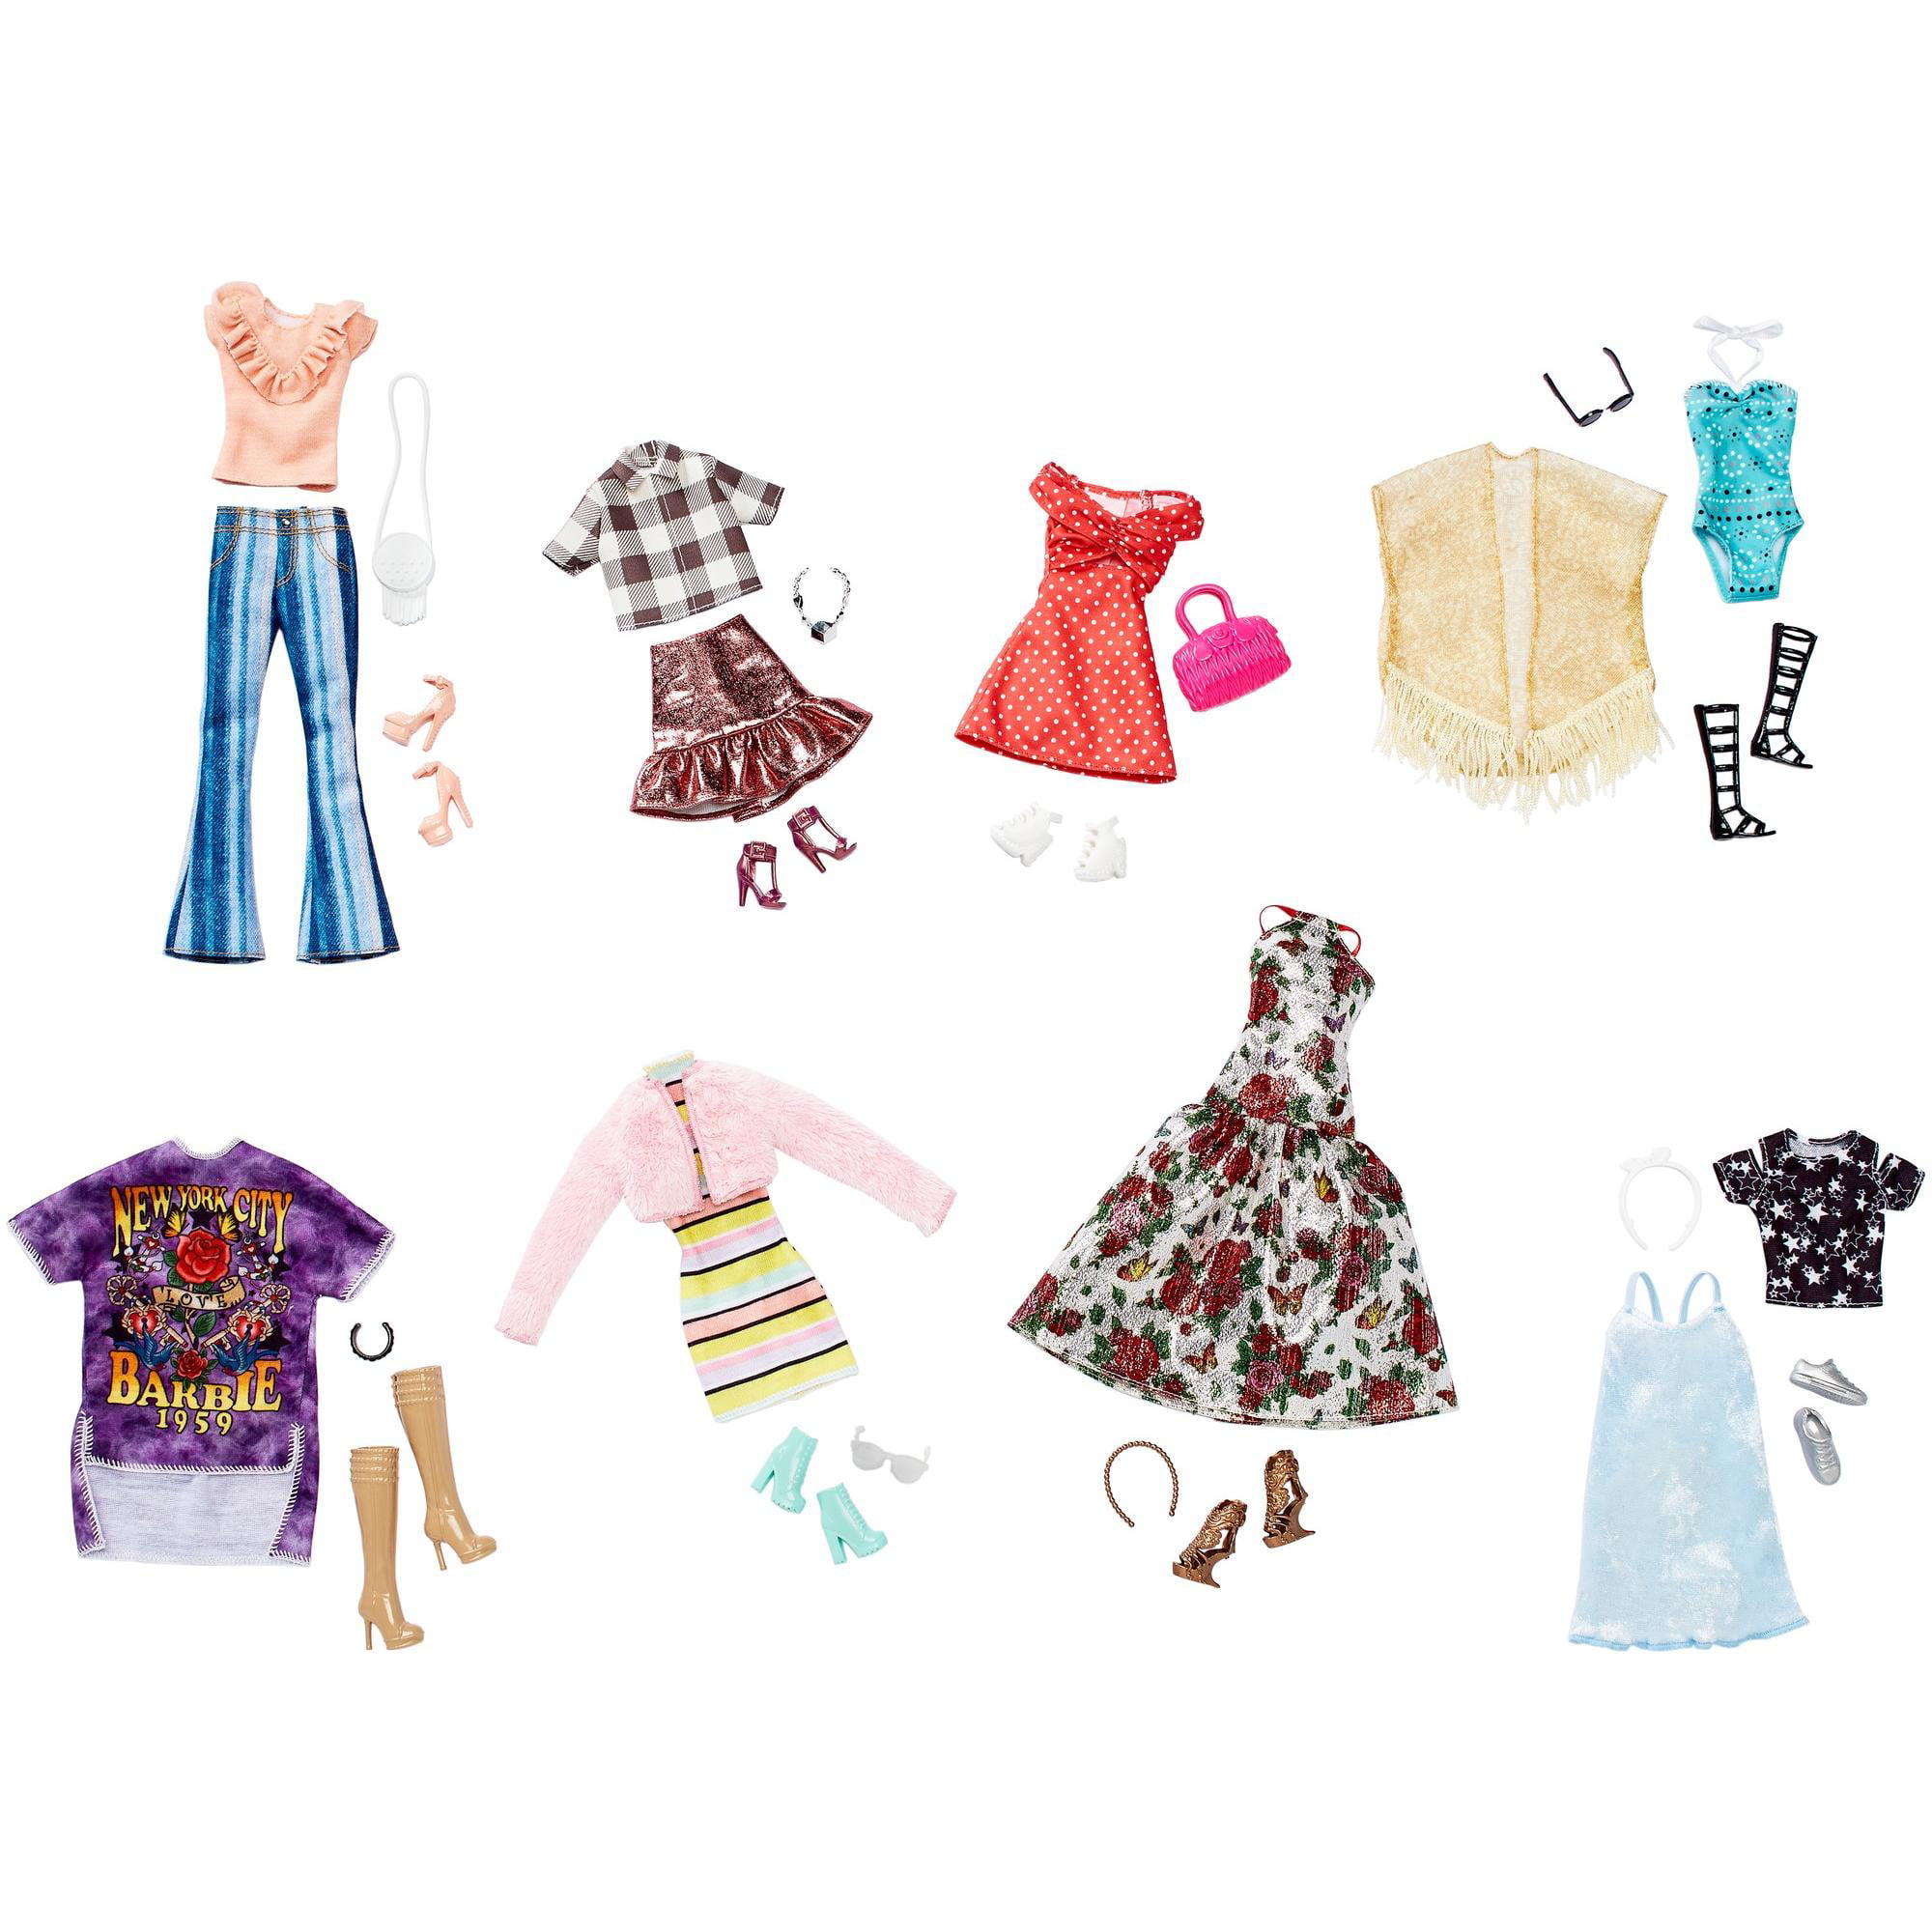  Barbie Clothes Multipack with 8 Complete Outfits for Barbie  Doll, 25+ Pieces Include 8 Outfits, 8 Pairs of Shoes & 8 Accessories, Gift  for 3 to 8 Year Olds : Toys & Games